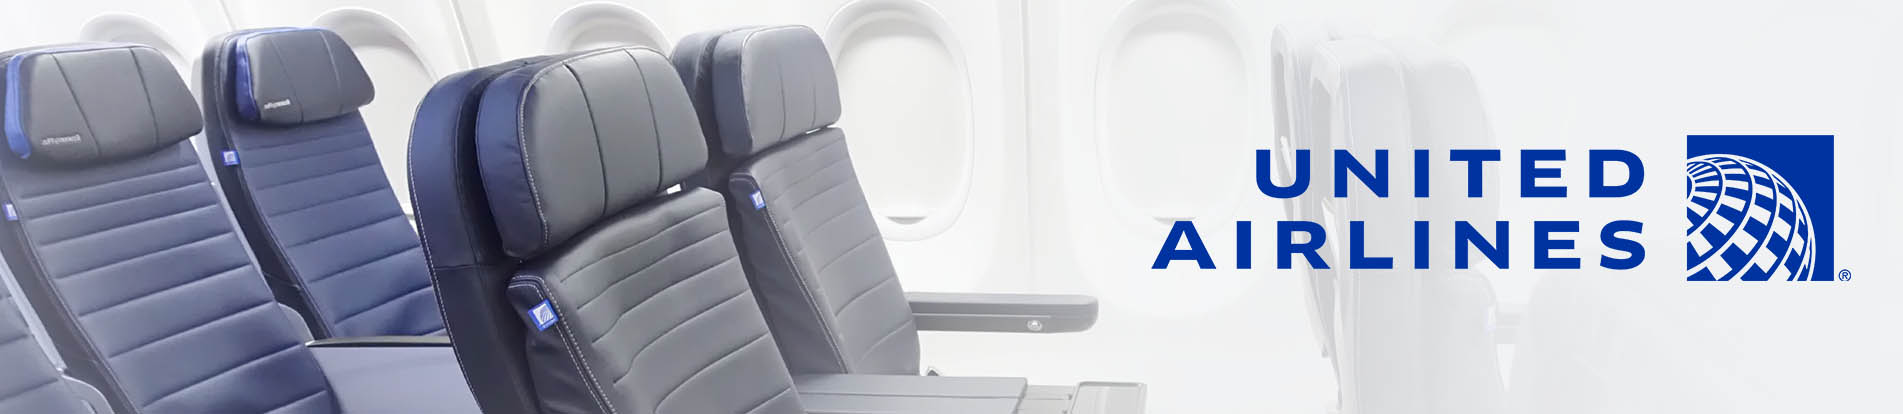 How to Get Cheap United Airlines First Class Flights Tickets?